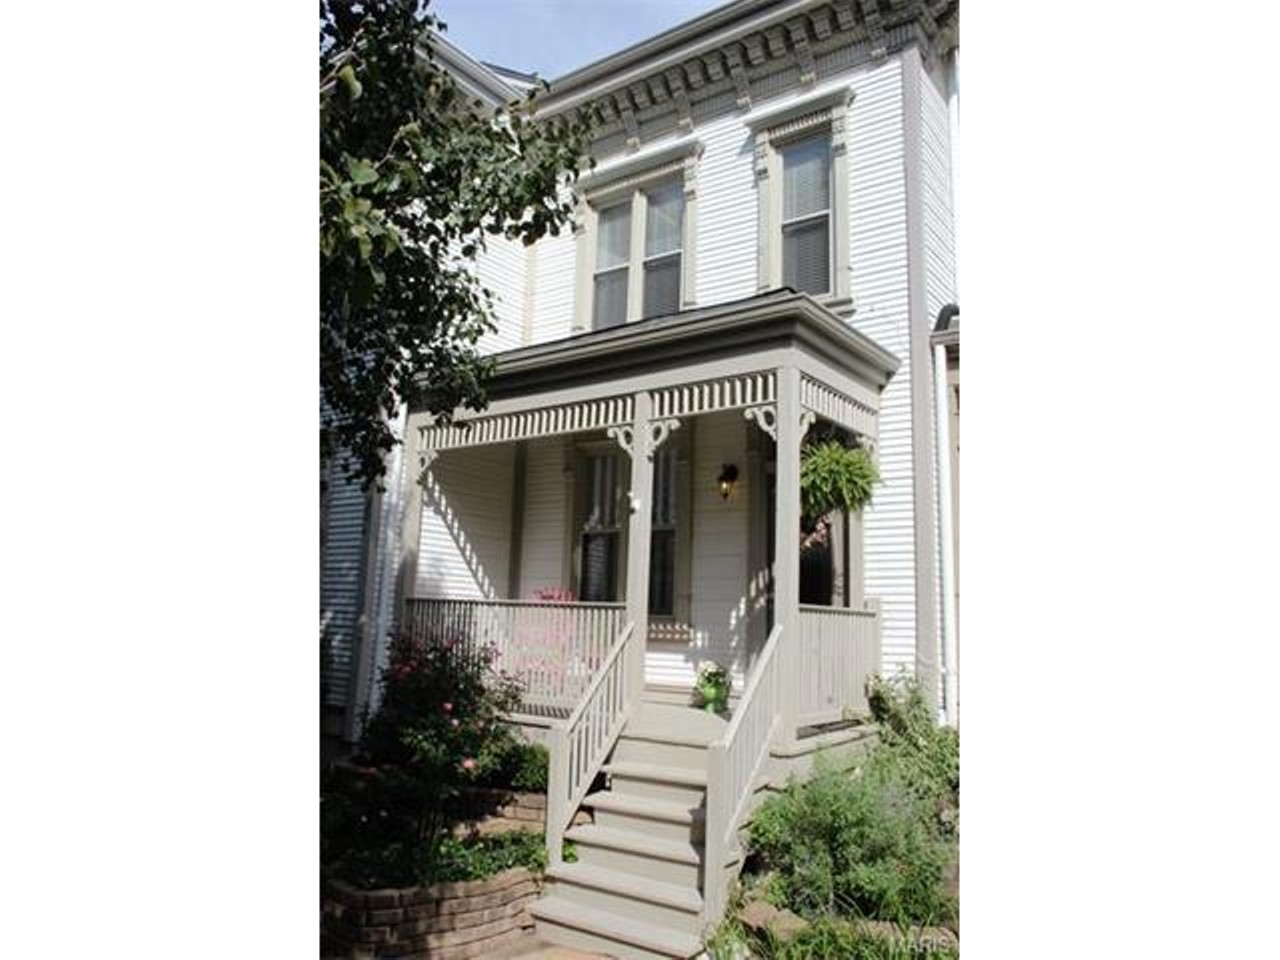 2212 Hickory Street
St. Louis, MO 63104
$179,900
2 beds / 2 baths / 1,292 sqft
5 minute walk to Lafayette Park. Directions here.
This townhouse has it all: wood floors, high ceilings, a gas fireplace, crown molding, special millwork ... you get the idea. The dishwasher, garage door and back door are new -- and just wait until you see the beautiful landscaping.